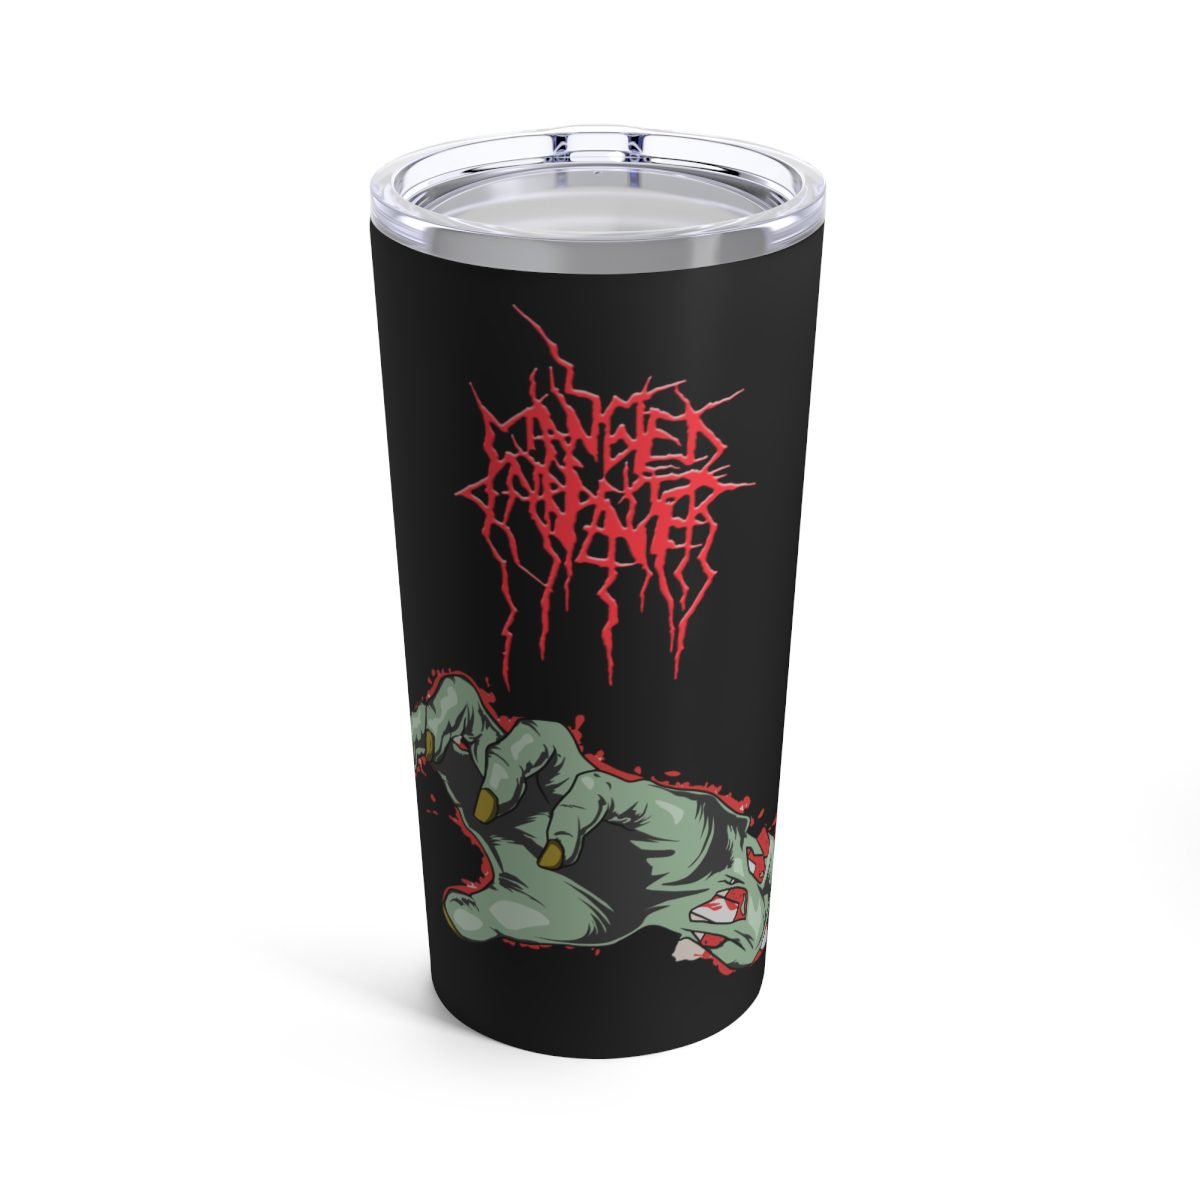 Mangled Carpenter – Clawing The Ark 20oz Stainless Steel Tumbler